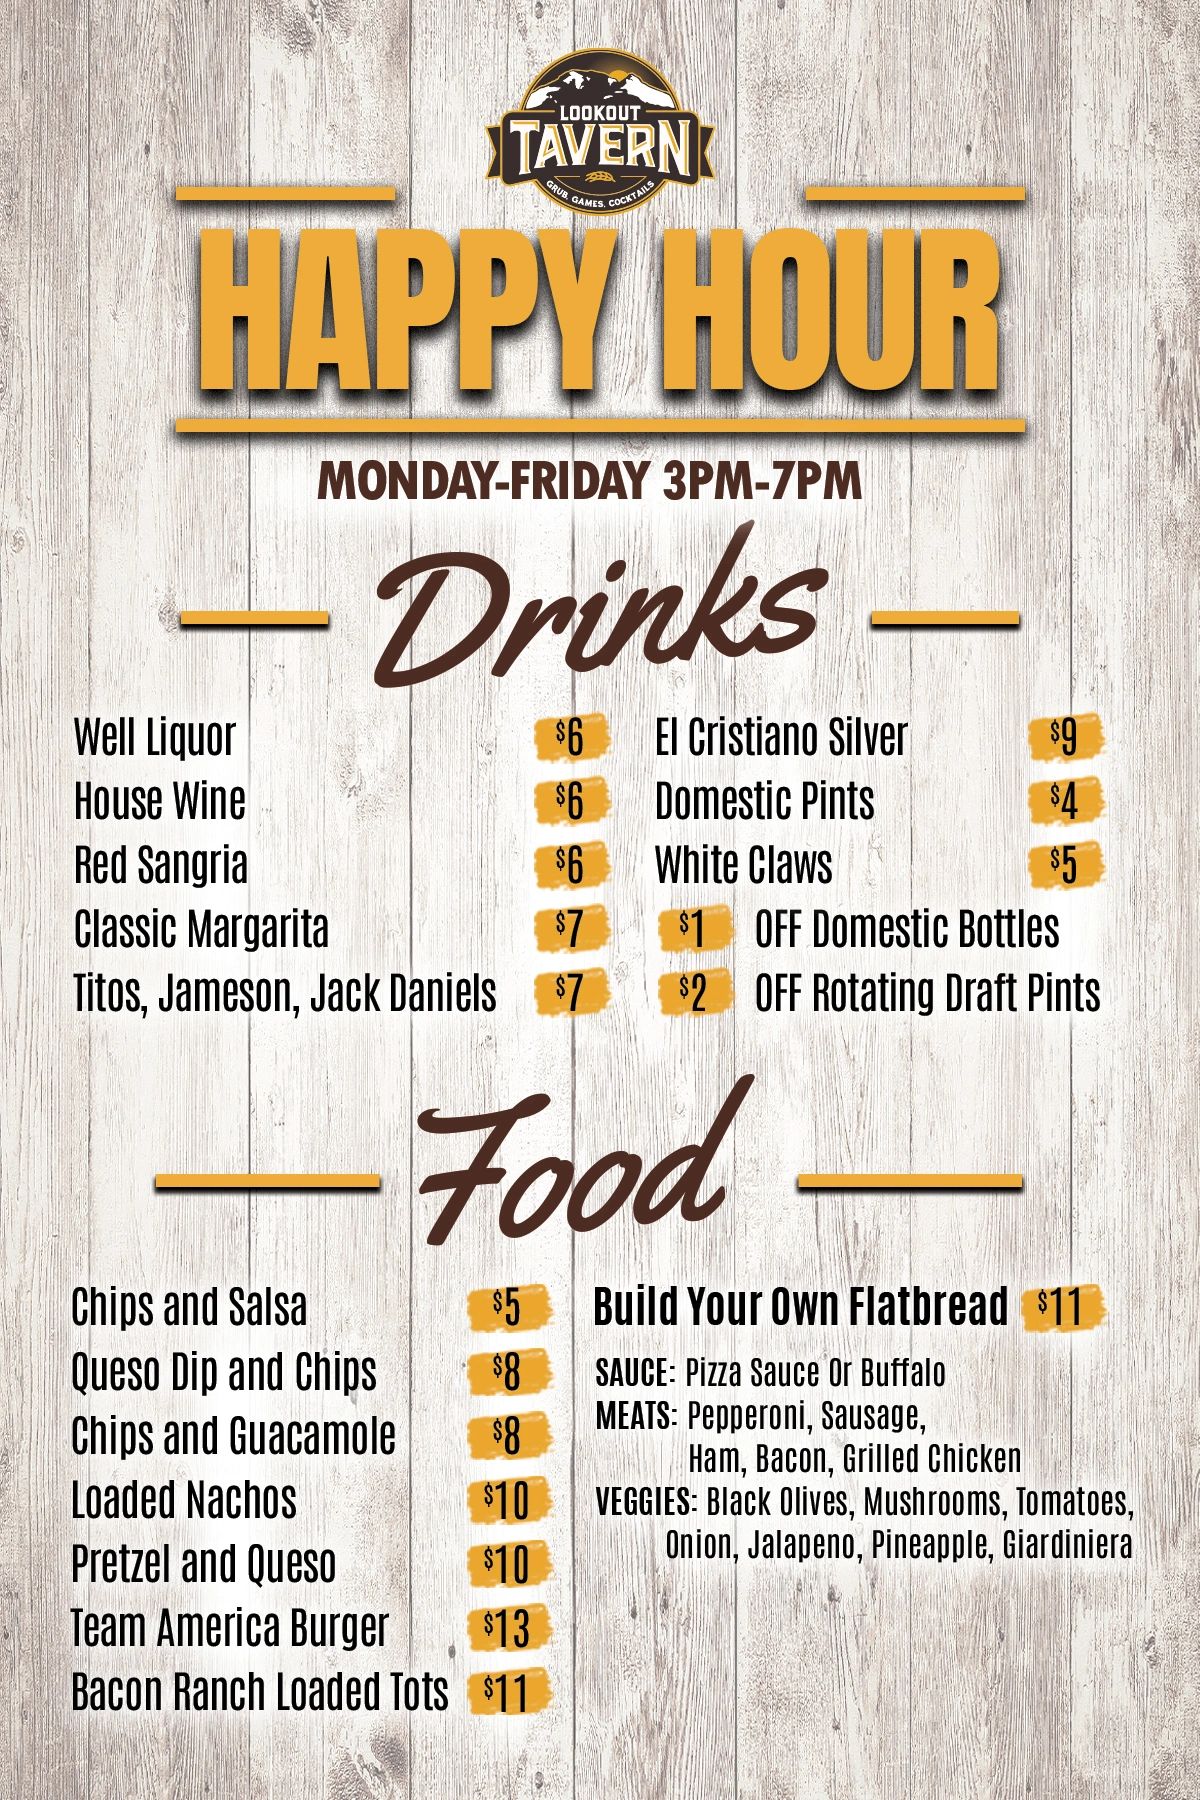 Happy Hour Monday through Friday 3pm to 7pm